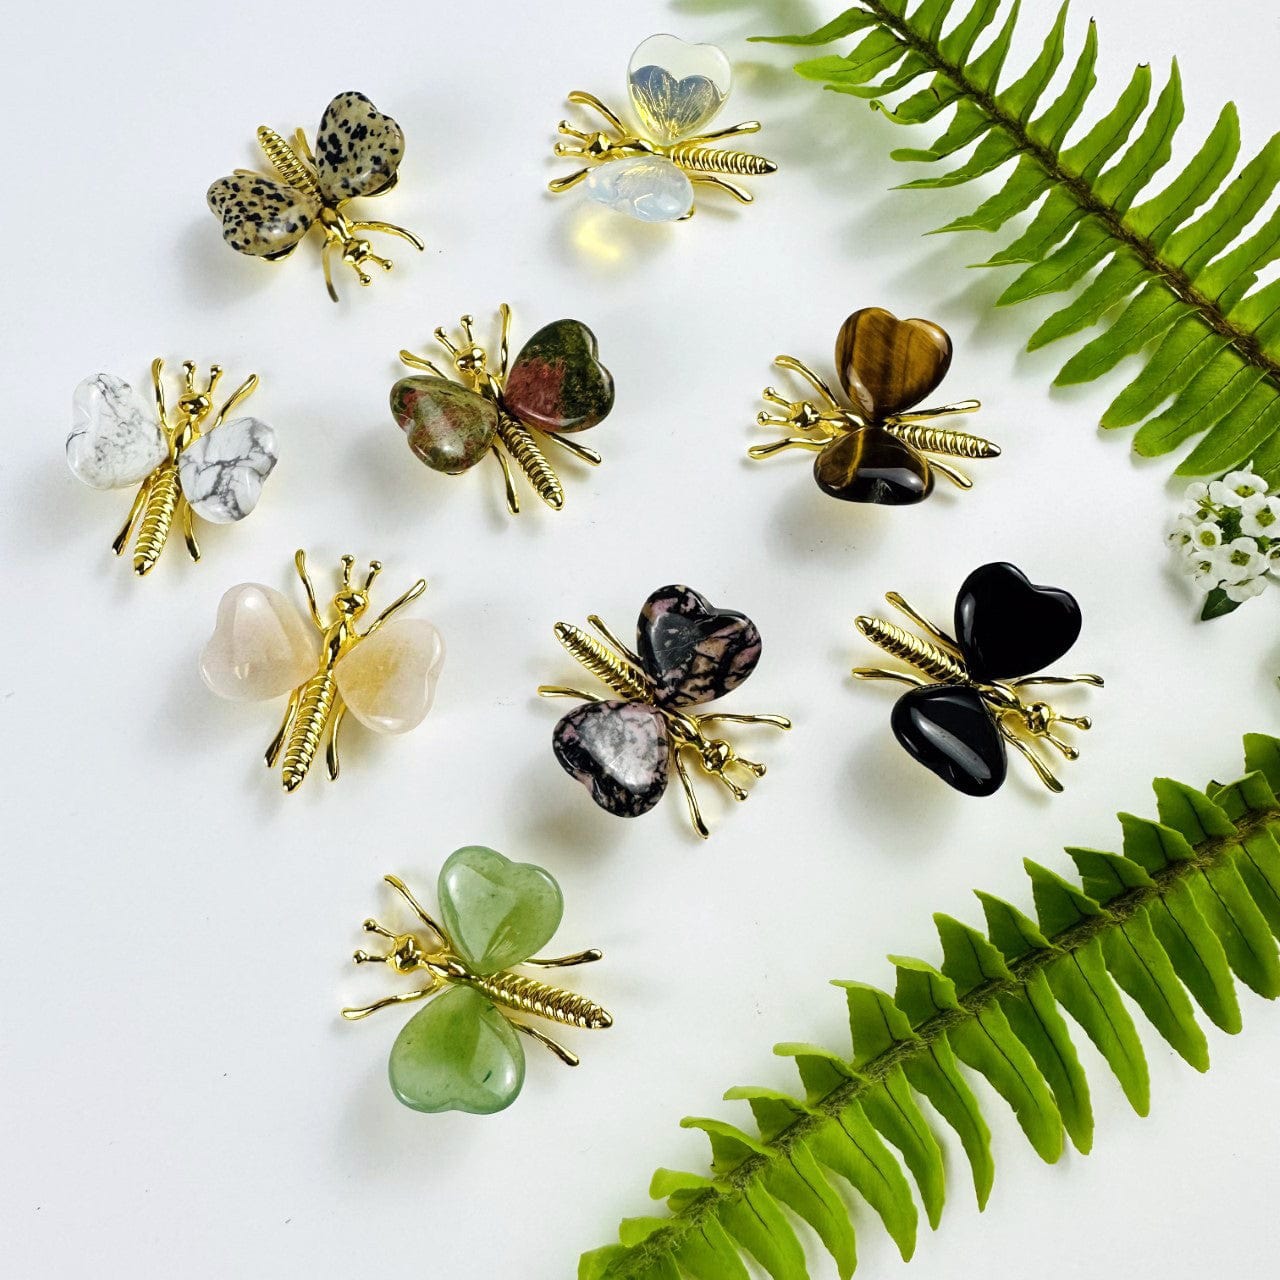 Gemstone Butterflies with Gold Tone Body on a table showing the assorted stones we carry